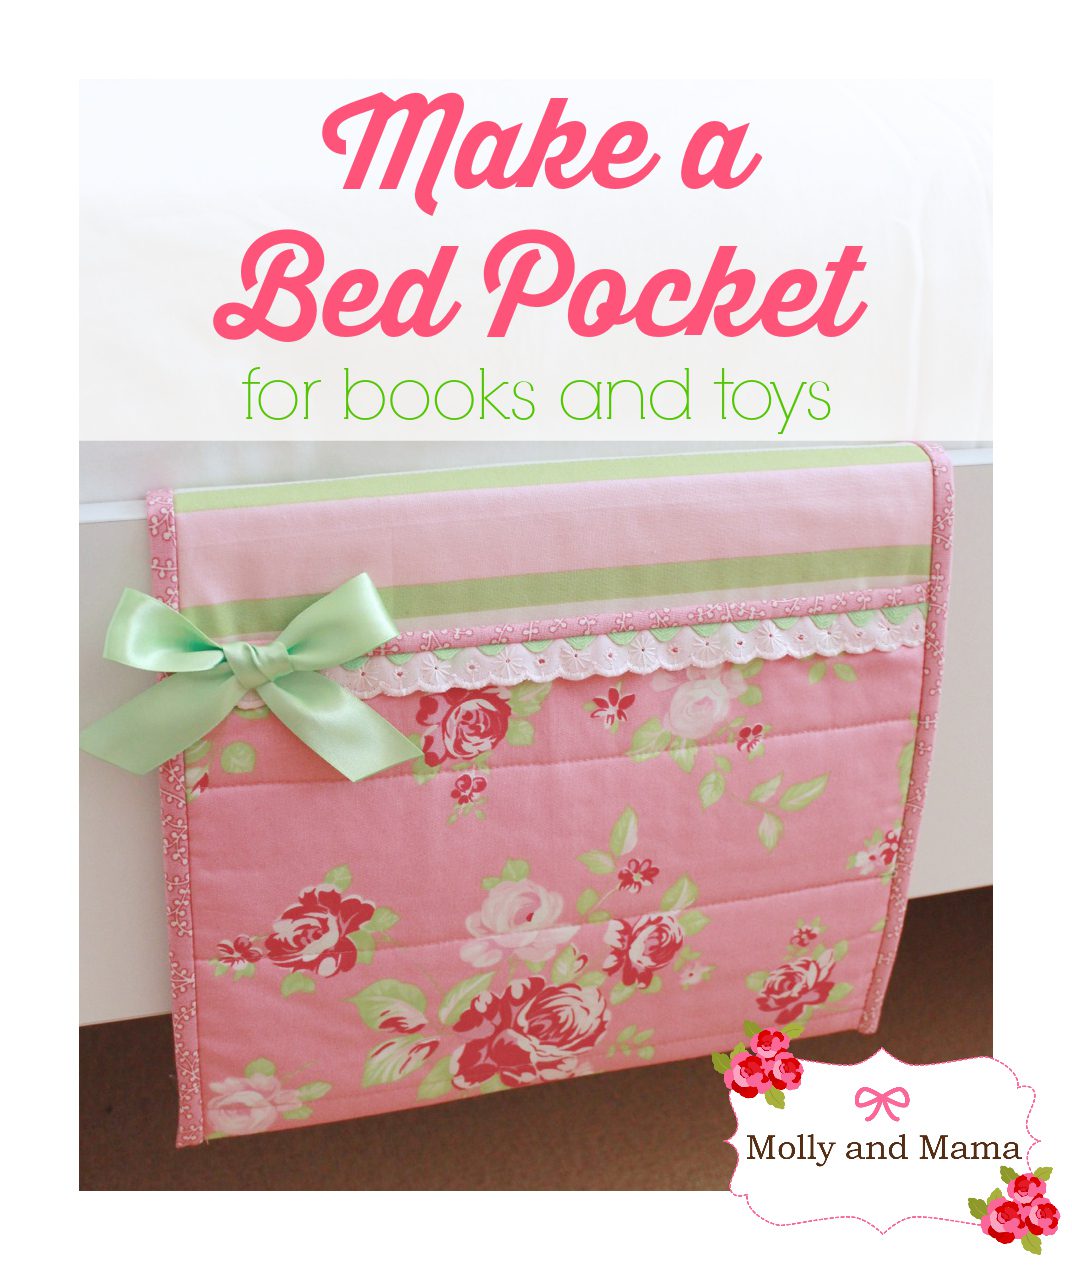 Make a Bed Pocket - a tutorial by Molly and Mama for www.SewMccool.com